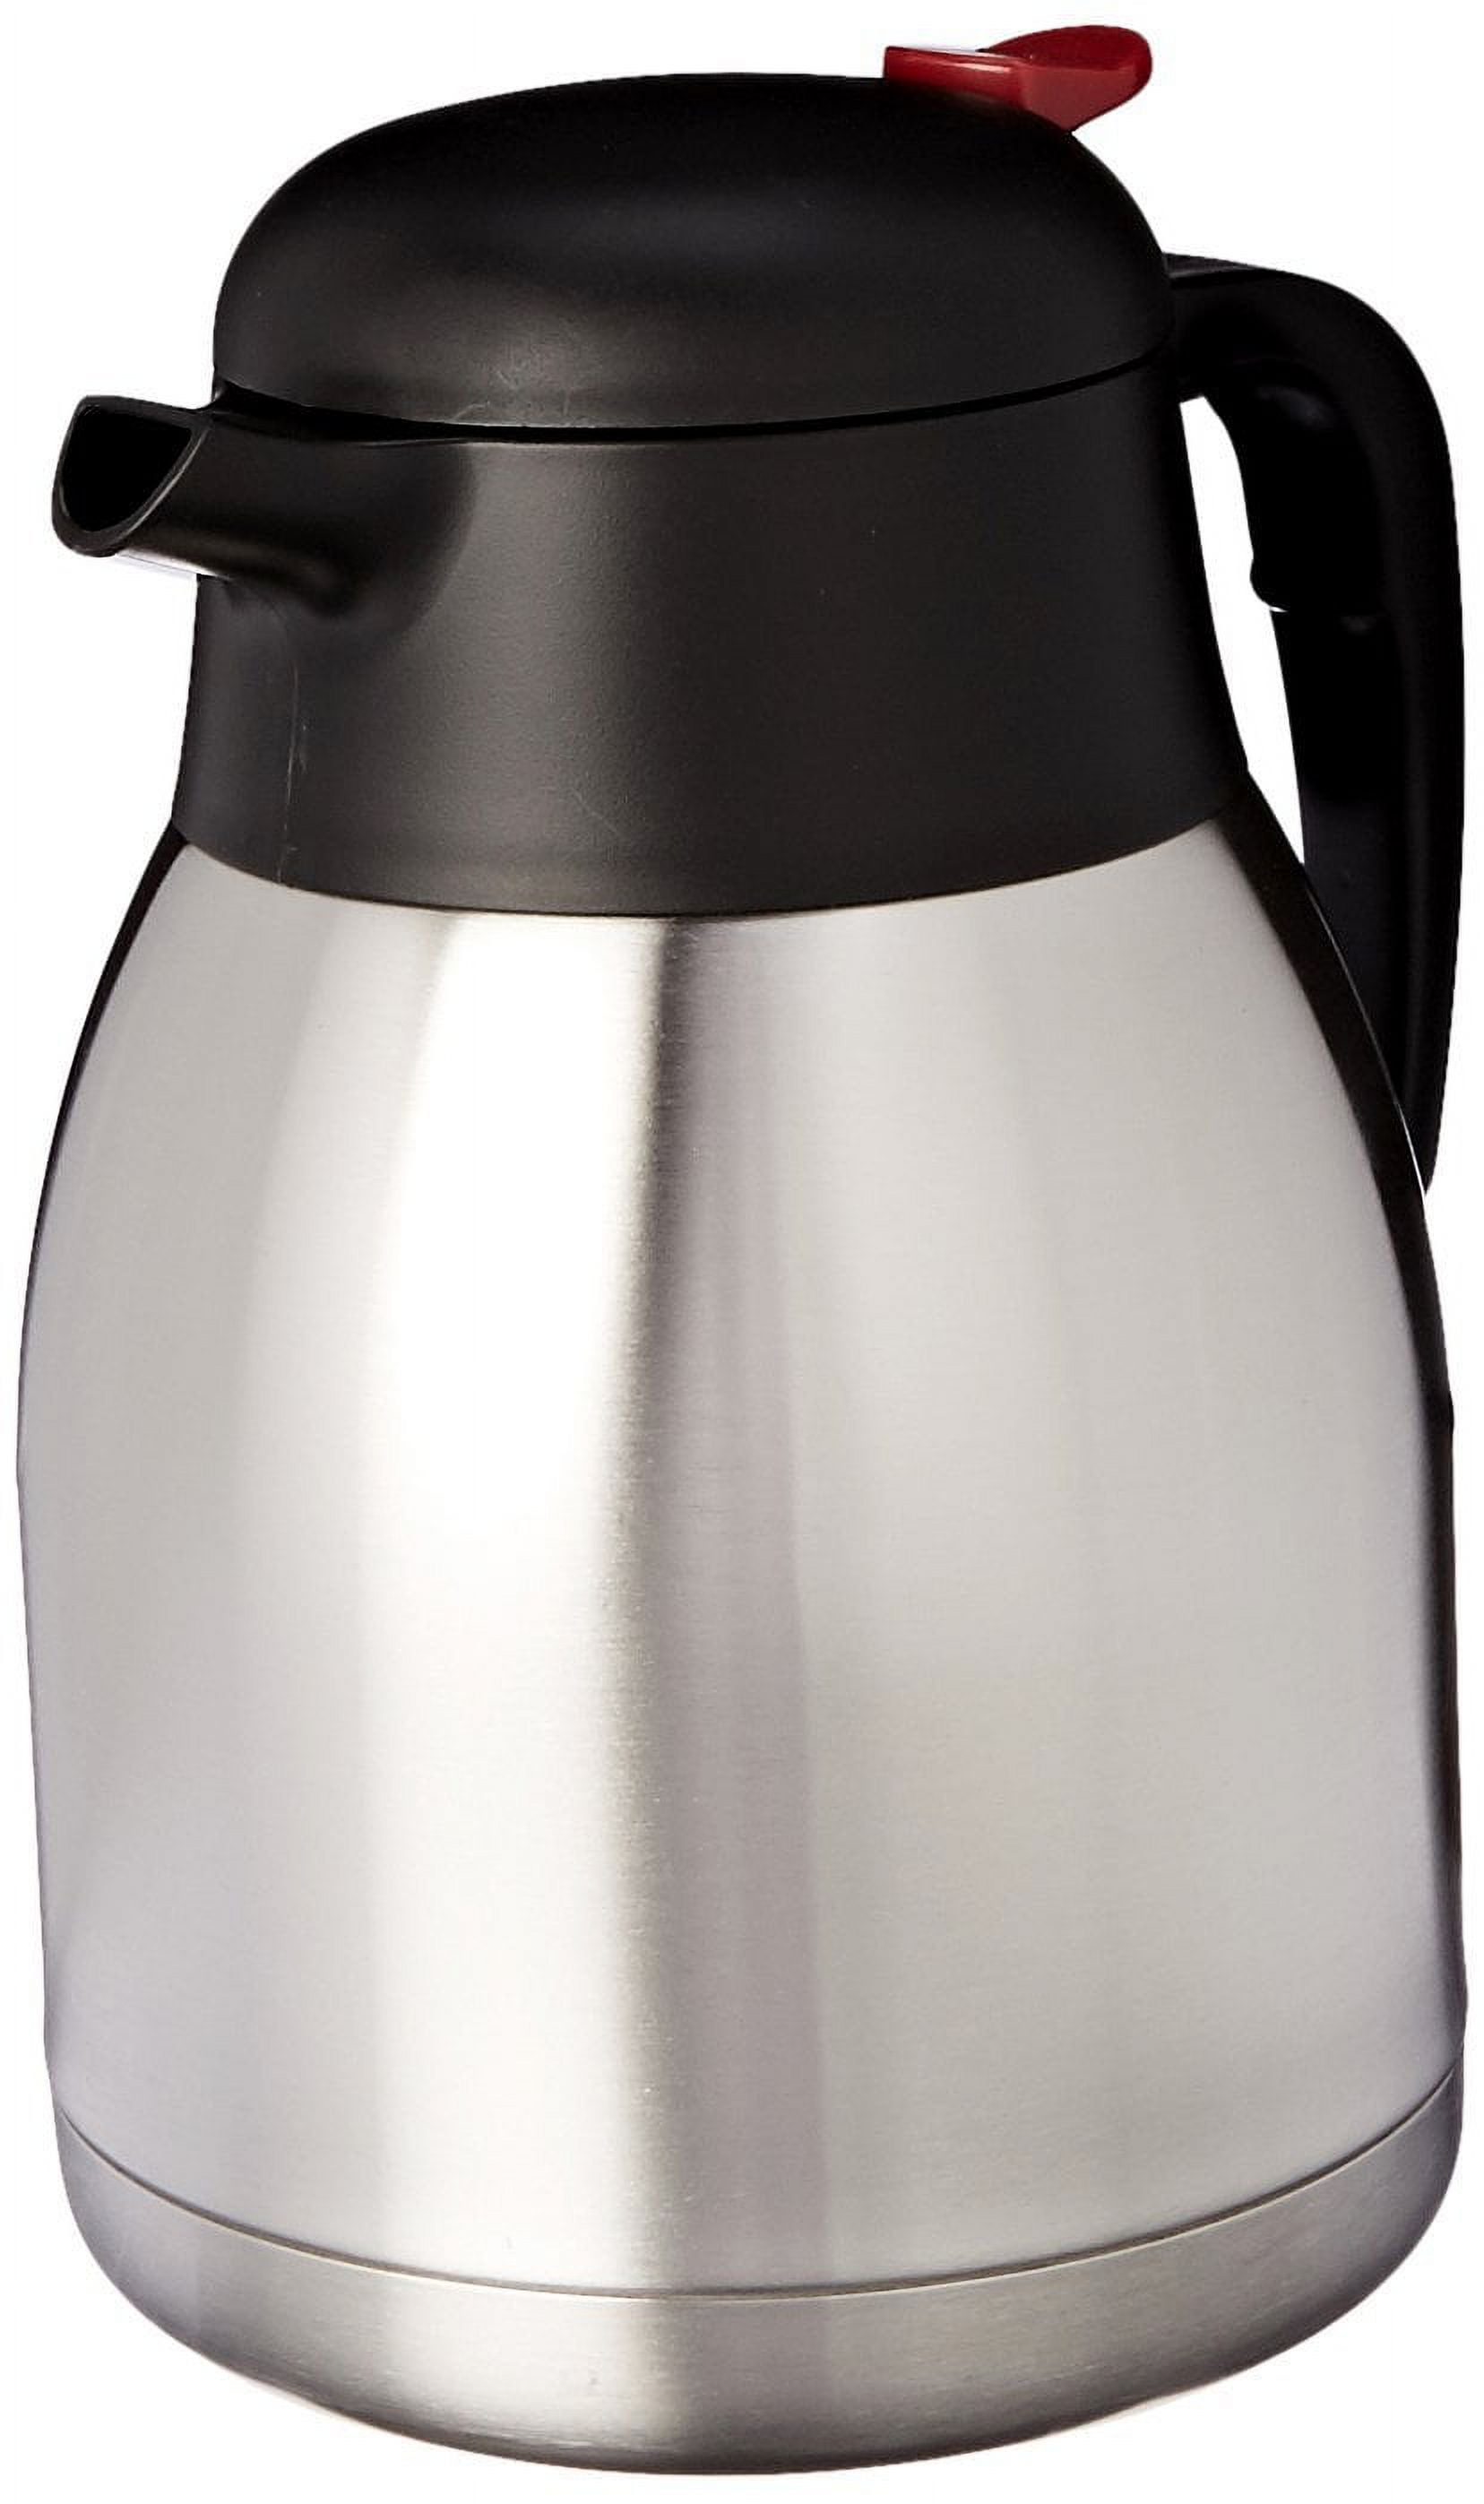 Bunn 40163.0000 Thermal Coffee Carafe Stainless Steel Professional Black,  EUC